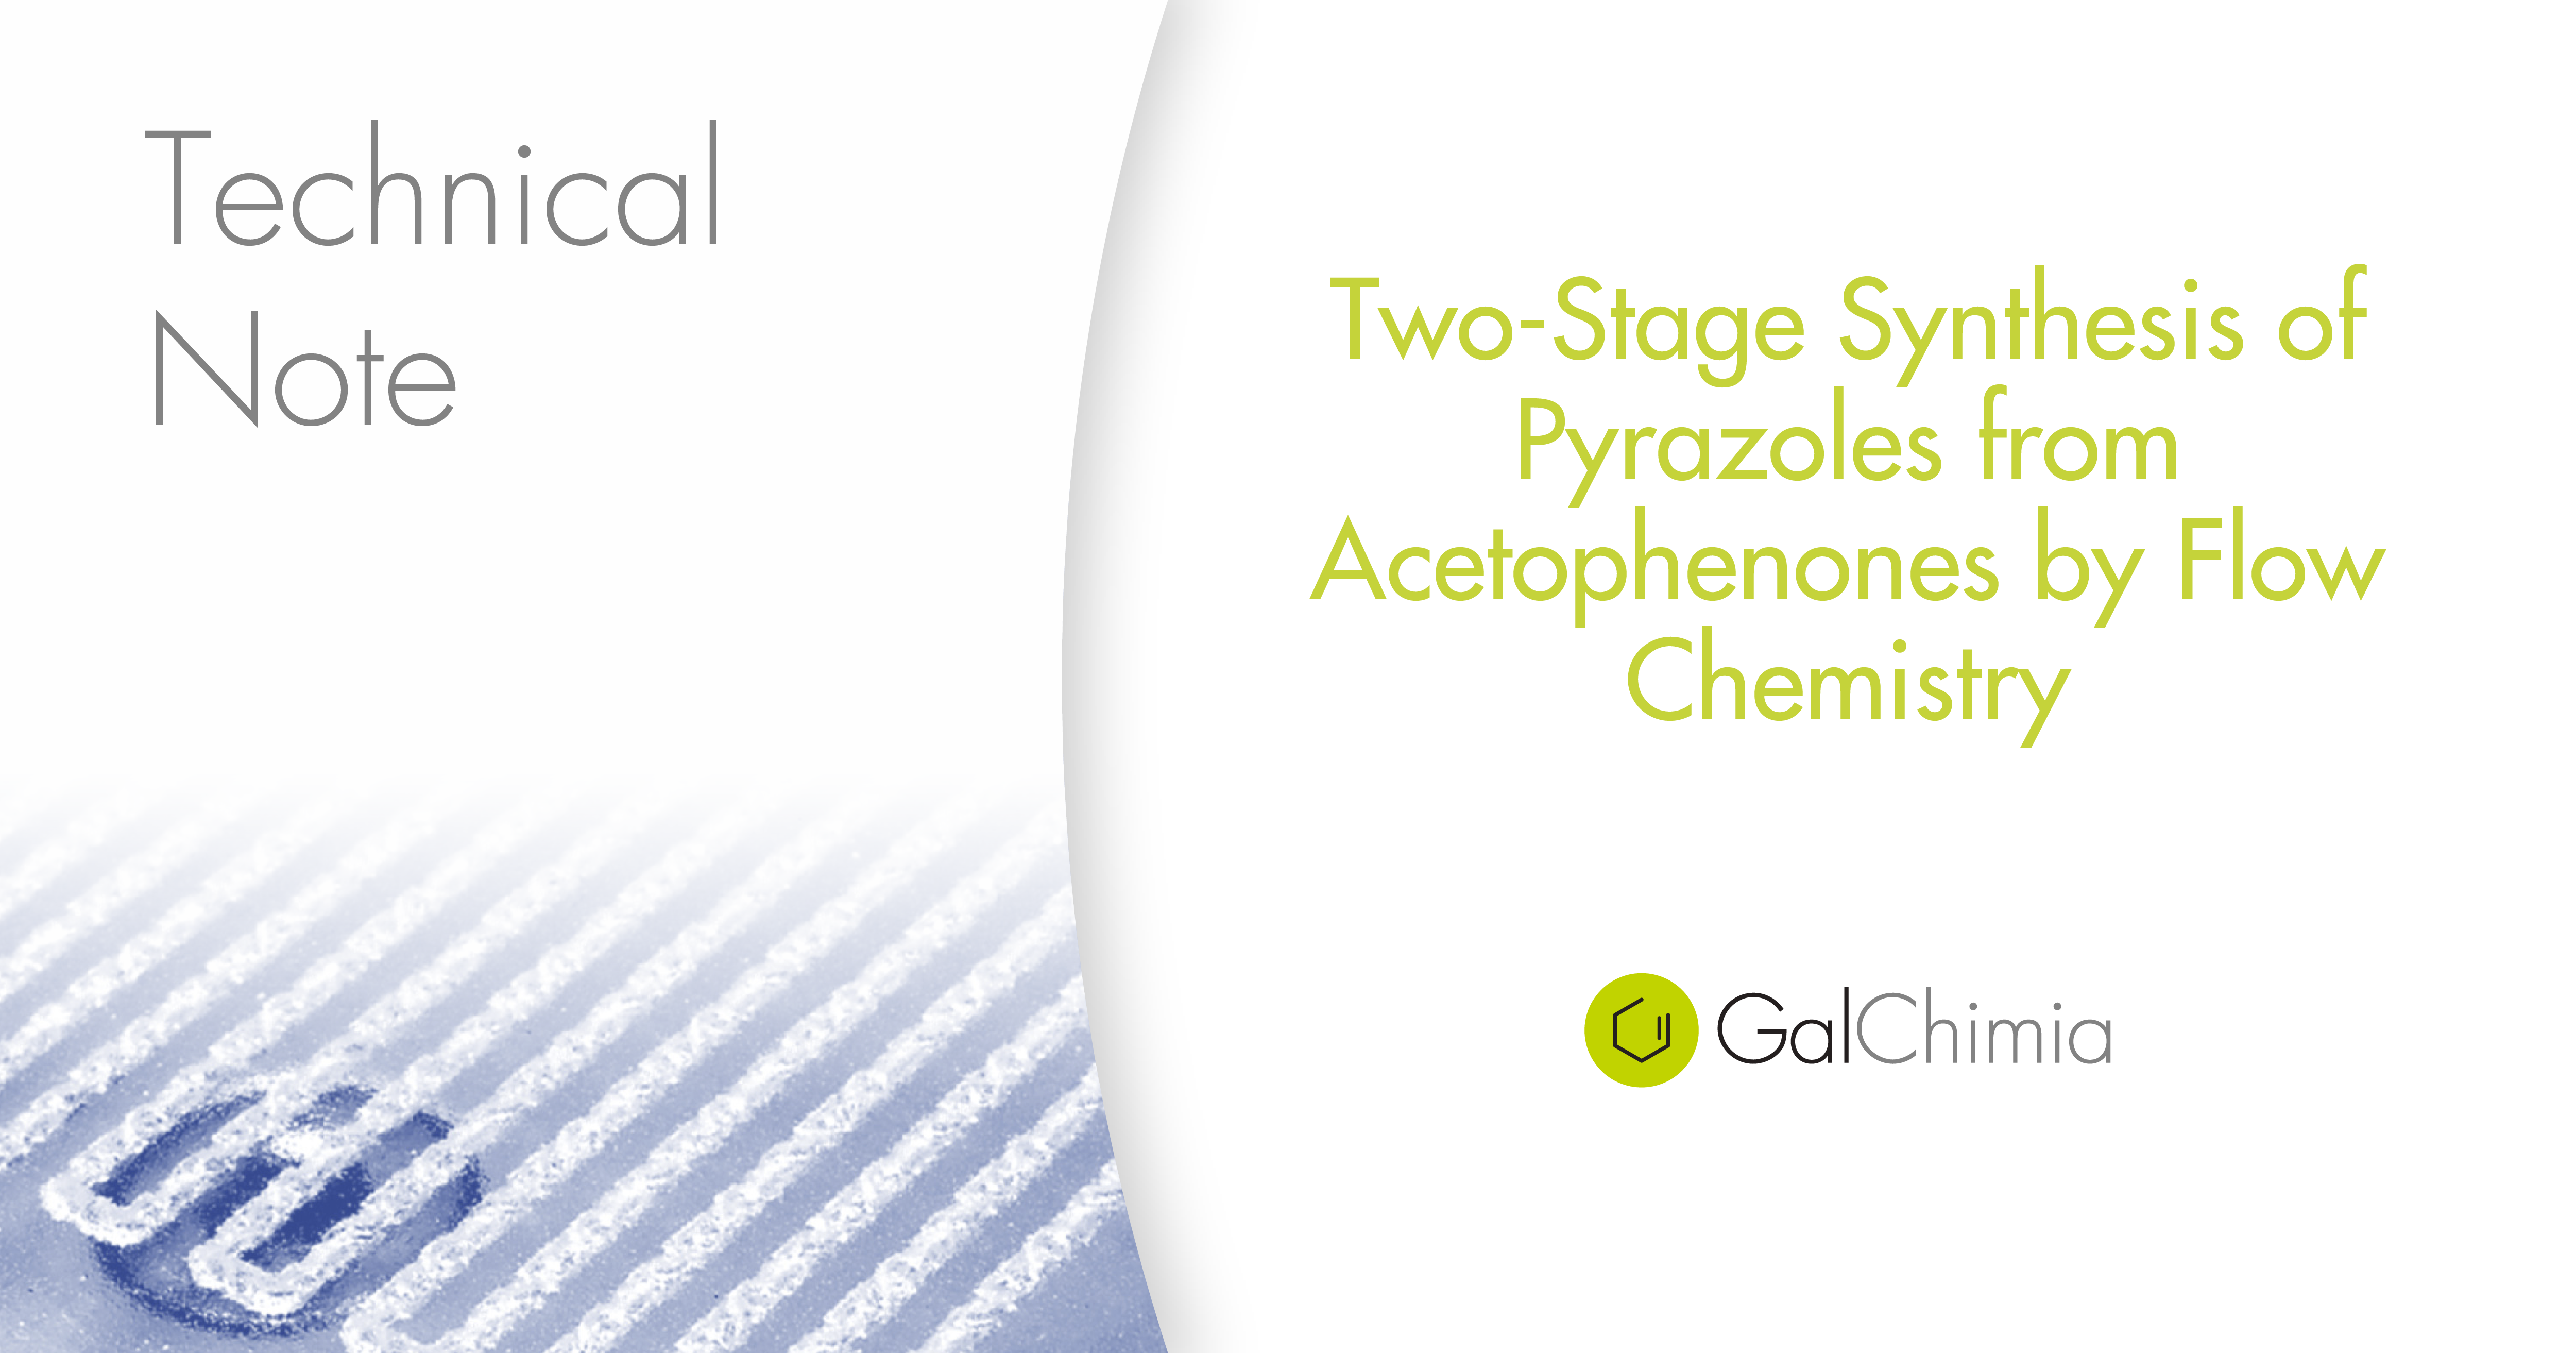 Two-Stage Synthesis of Pyrazoles from Acetophenones by Flow Chemistry